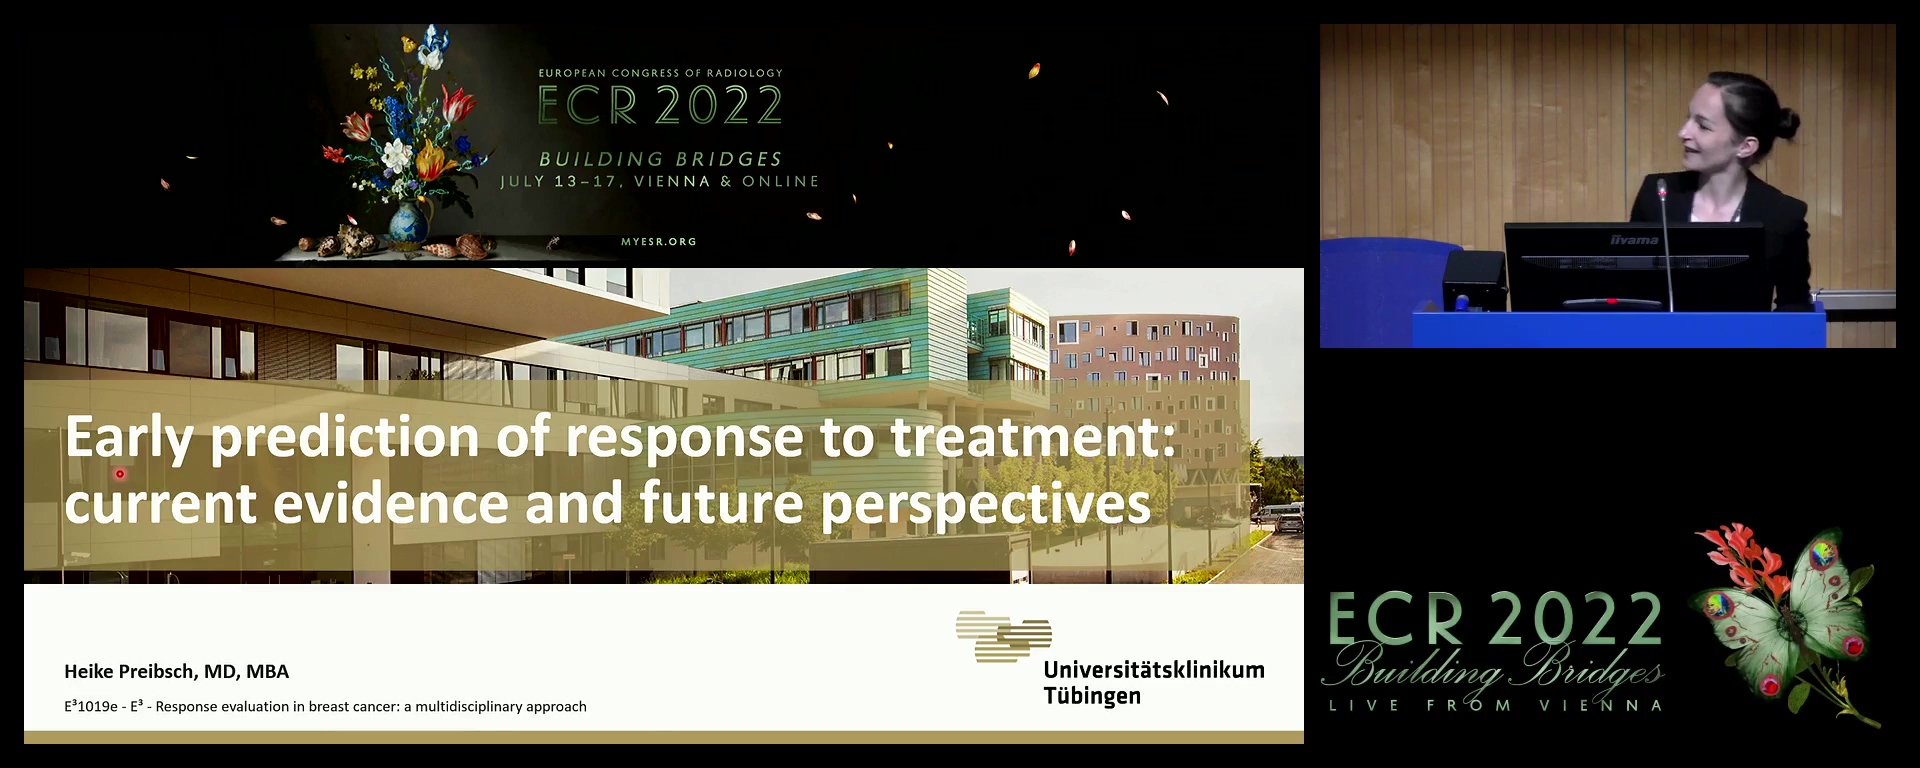 Early prediction of response to treatment: current evidence and future perspectives